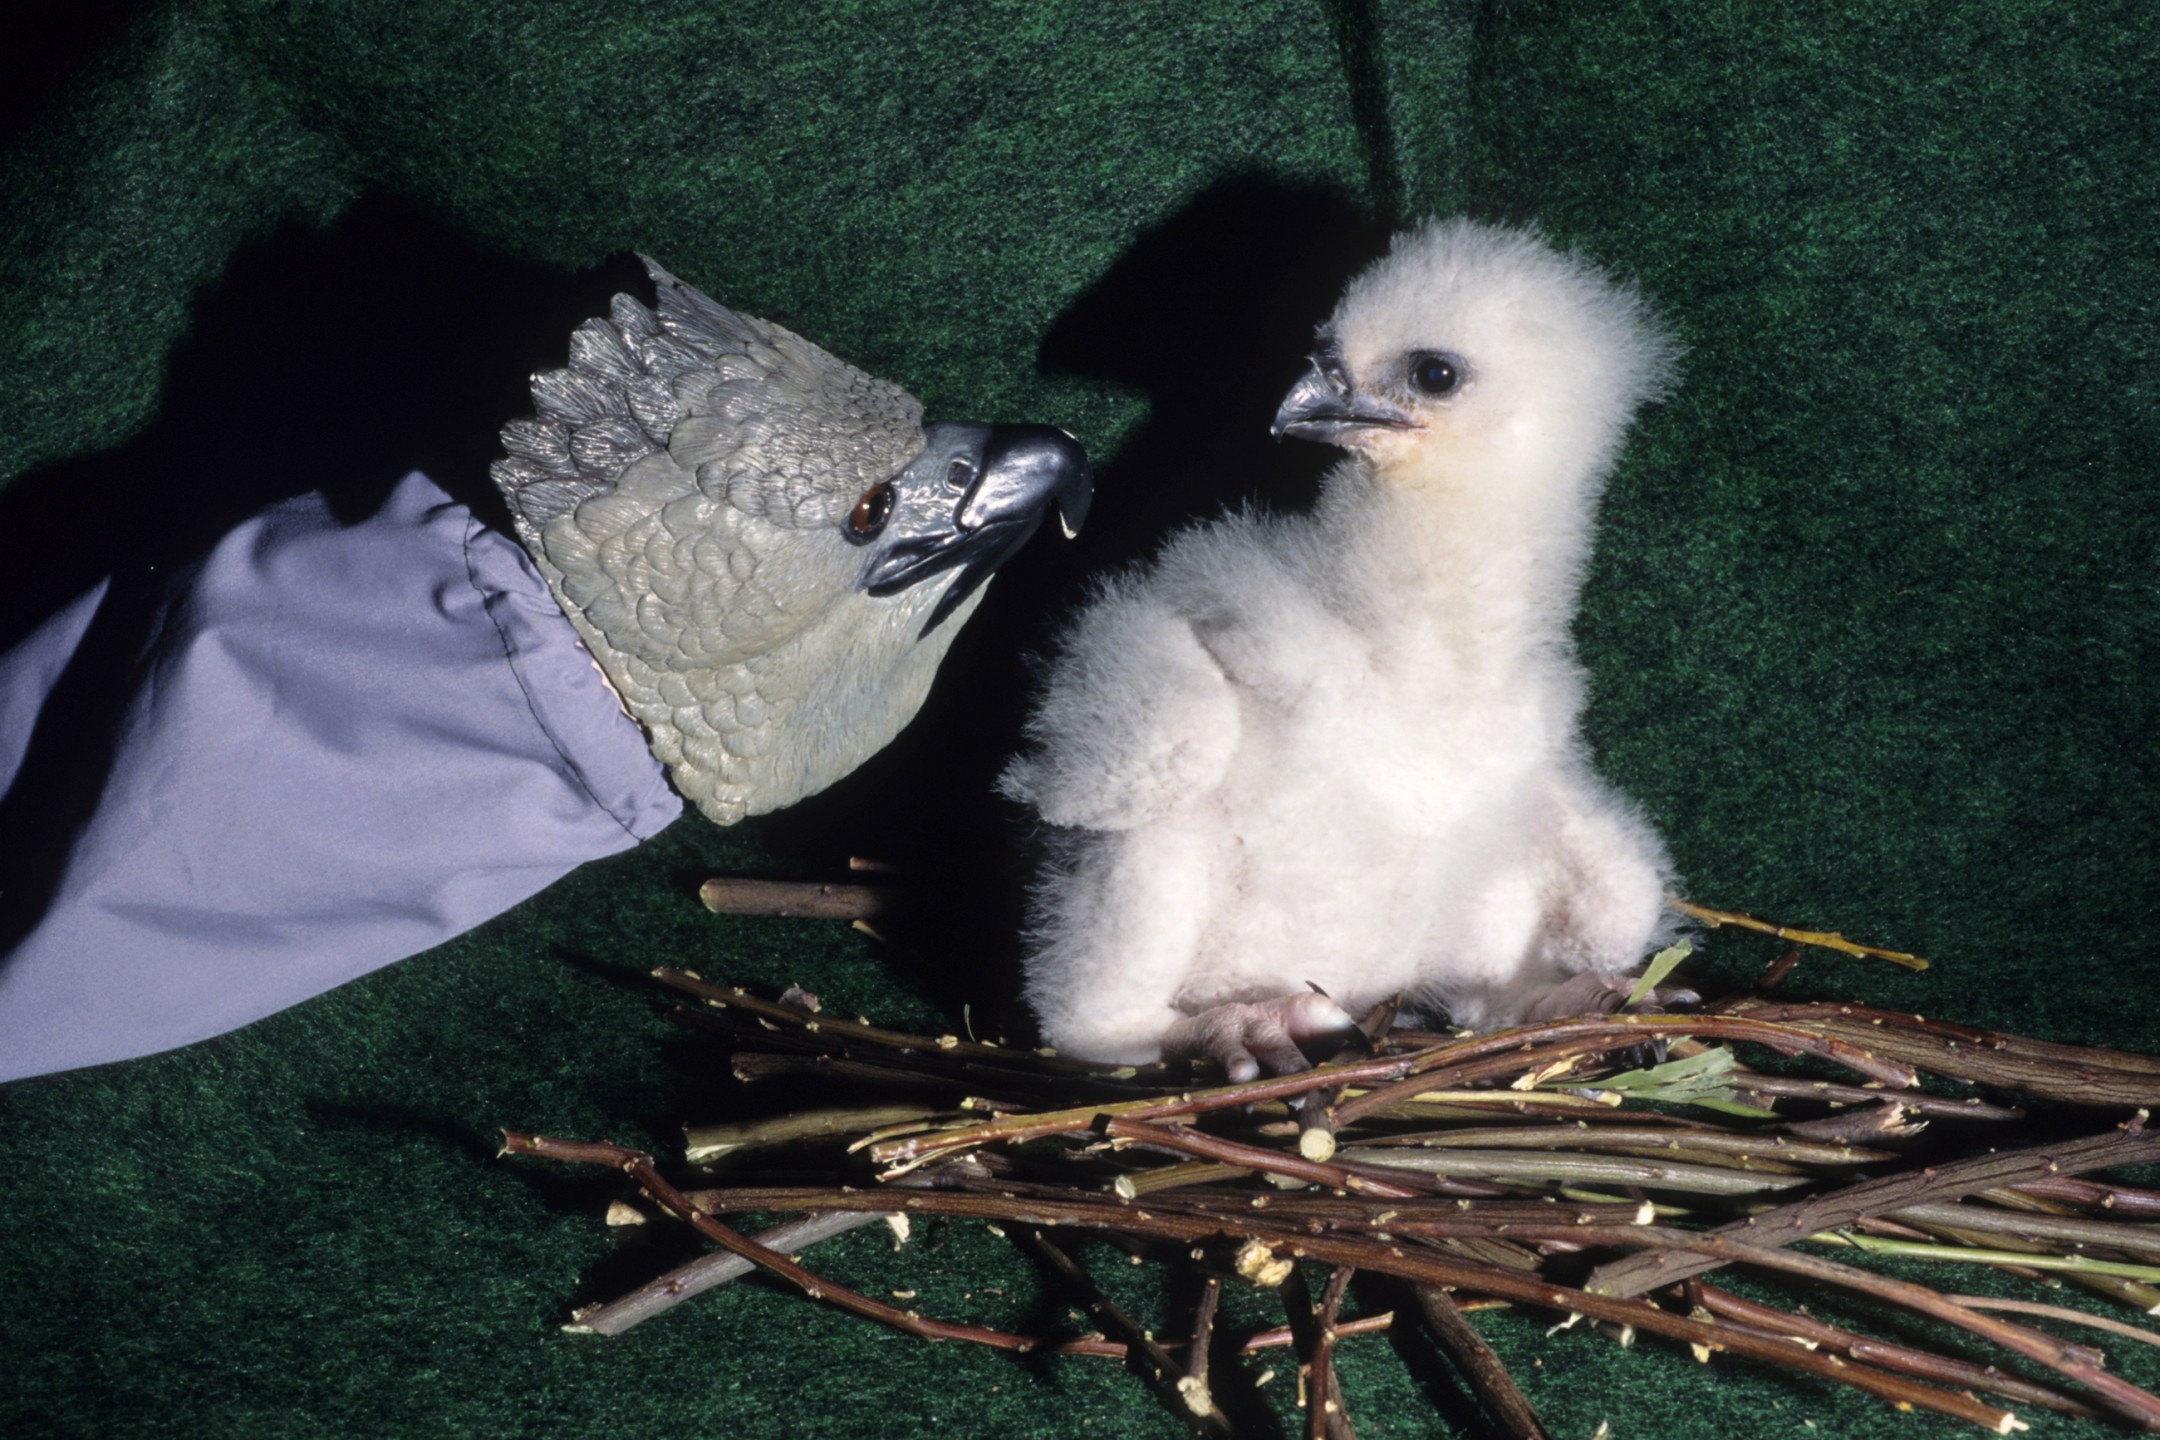 Harpy eagle chick with puppet